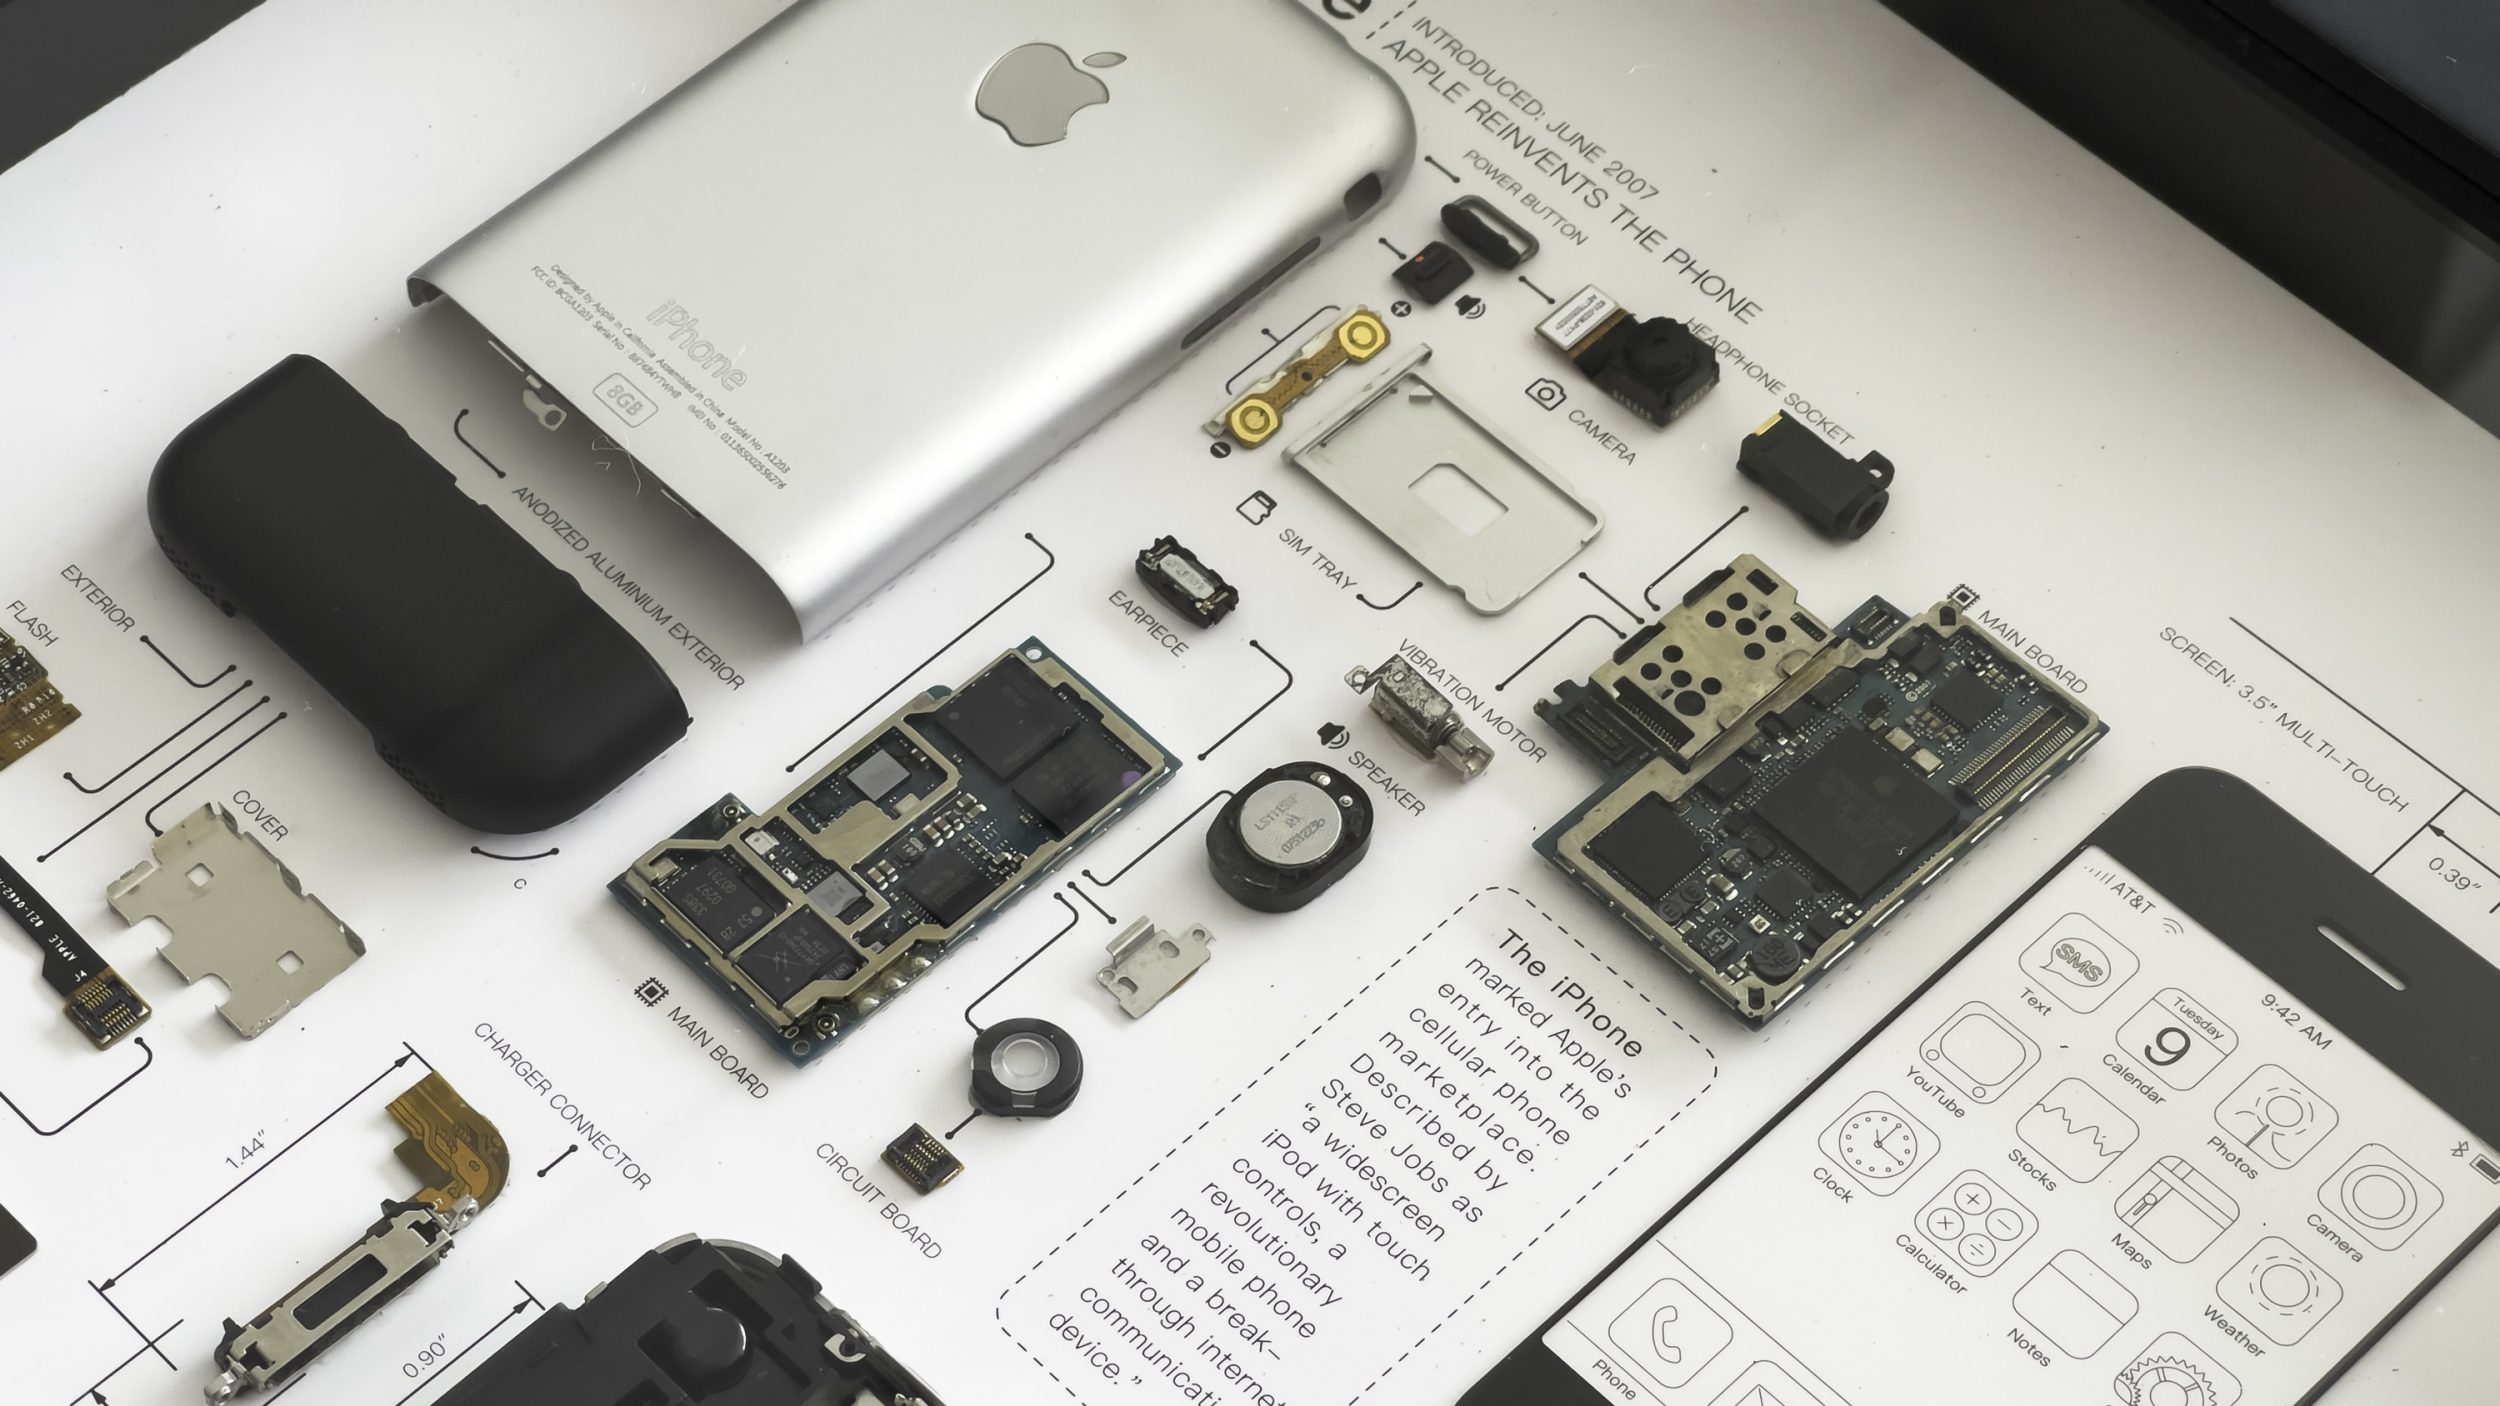 Disassembled layout of the original iPhone by GRID